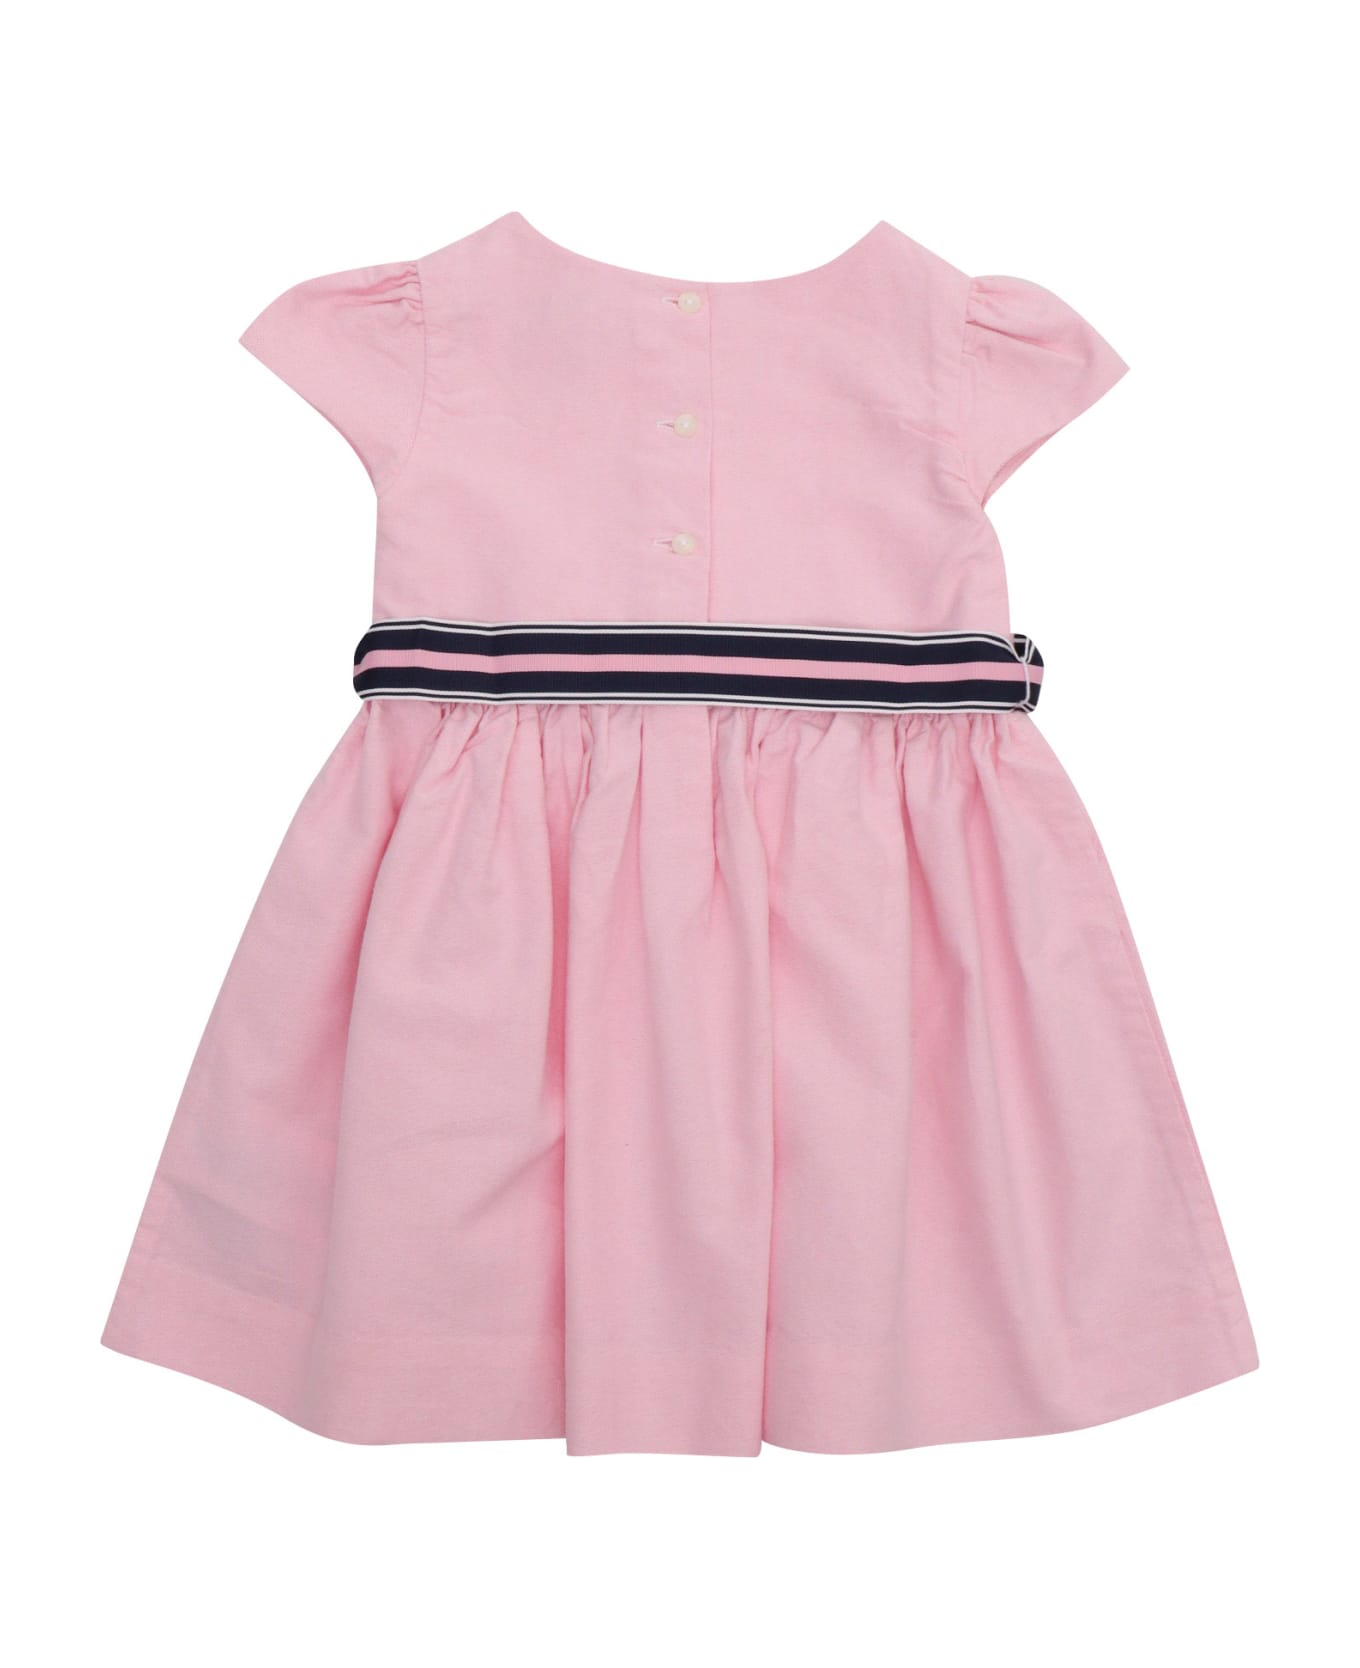 Polo Ralph Lauren Pink Dress With Bow - PINK